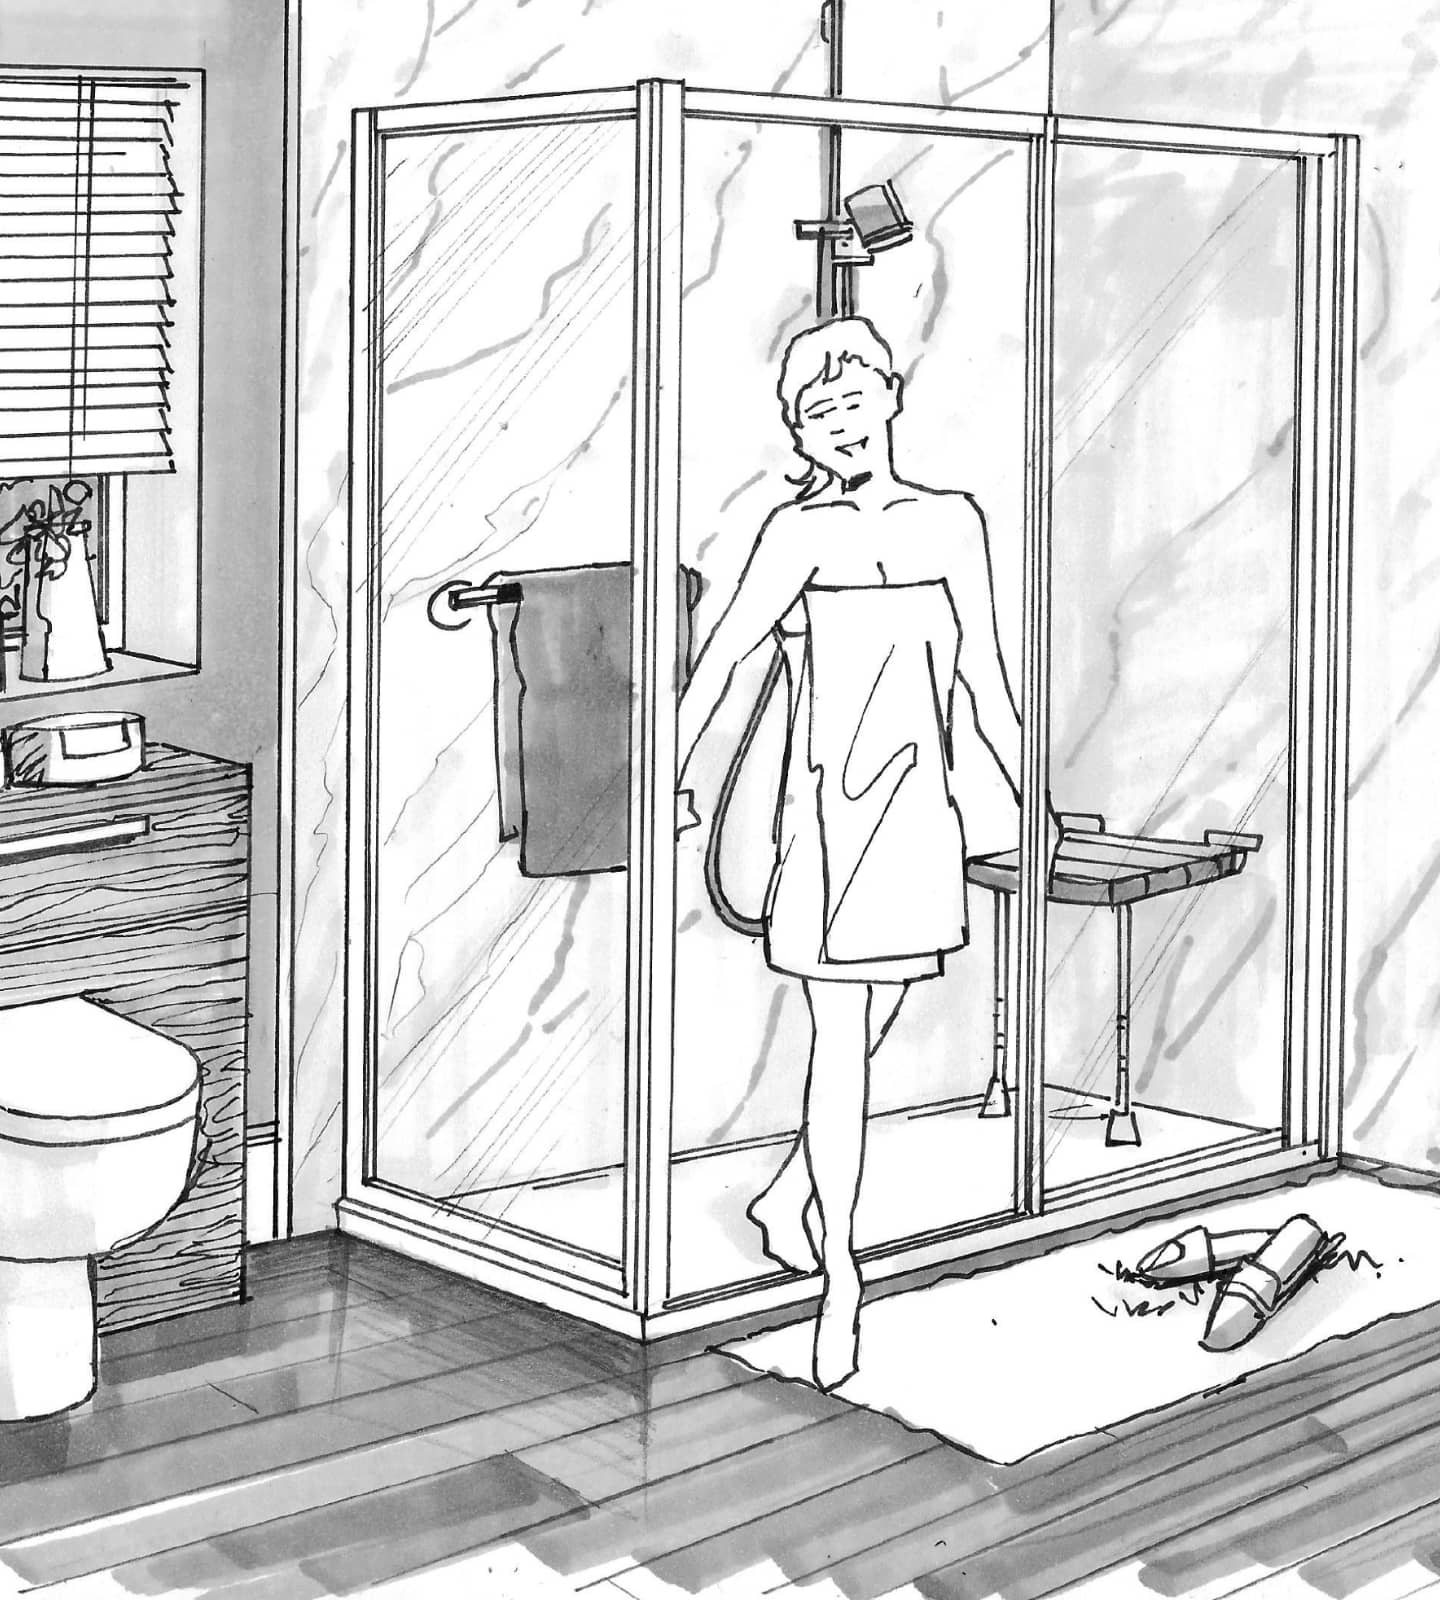 http://Storyboard%20image%20of%20a%20woman%20in%20a%20towel%20getting%20out%20of%20the%20shower